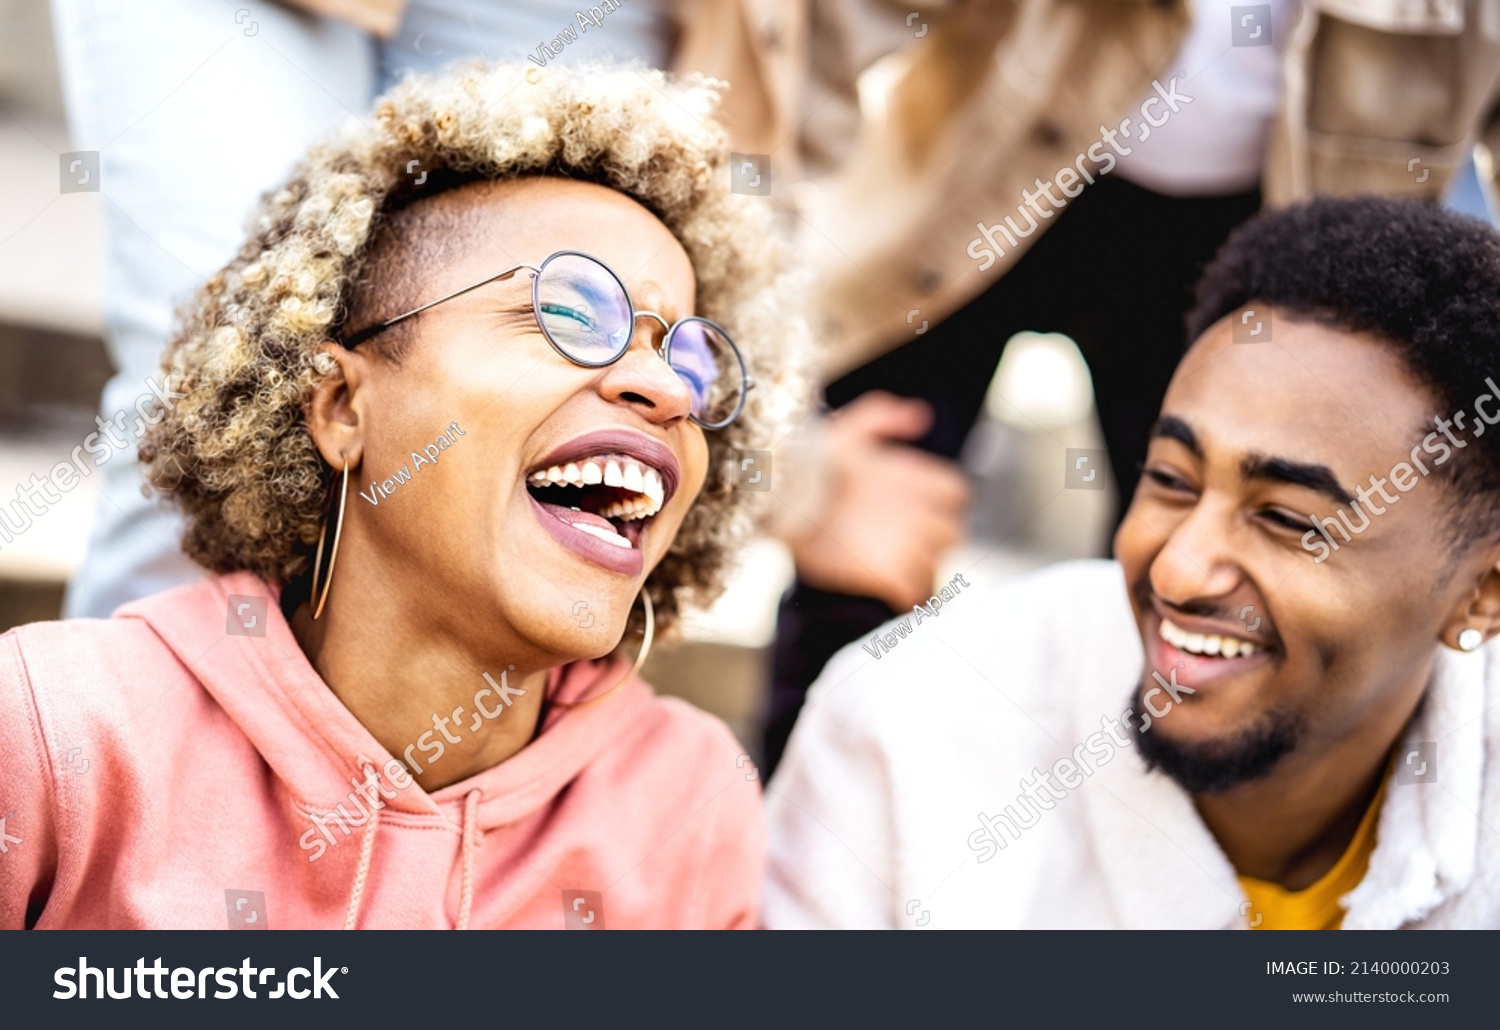 Multicultural couple on genuine laughter - Life style concept with happy multiracial friends having fun together out side - Trendy college students enjoying break time at campus - Warm vivid filter #2140000203